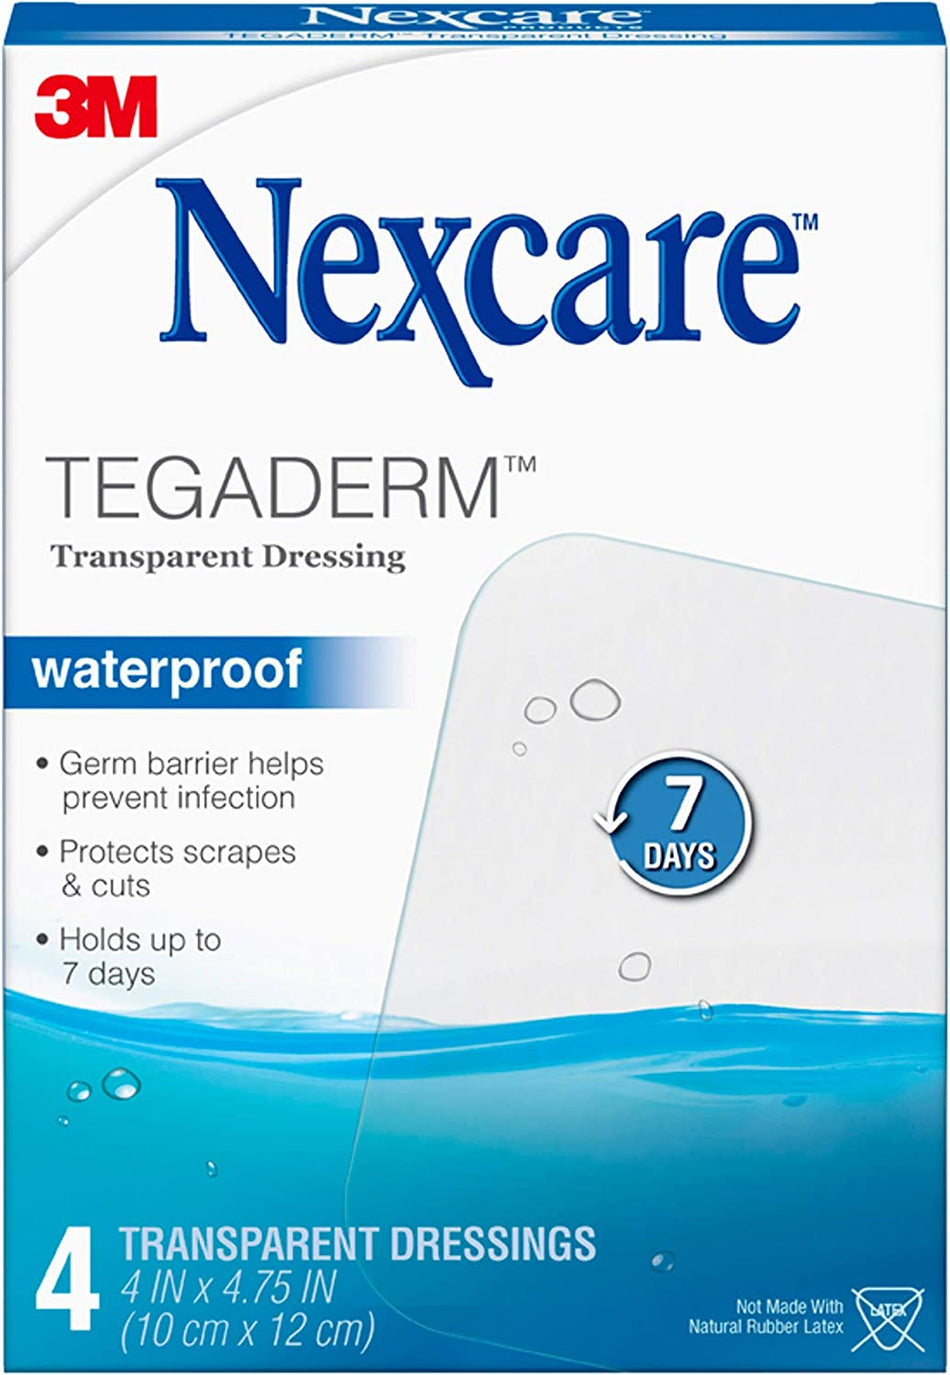 Code 1 Supply 3M H1626 Nexcare Tegaderm Waterproof Transparent Dressing 4 in. x 4 3/4 in. (Box of 4)